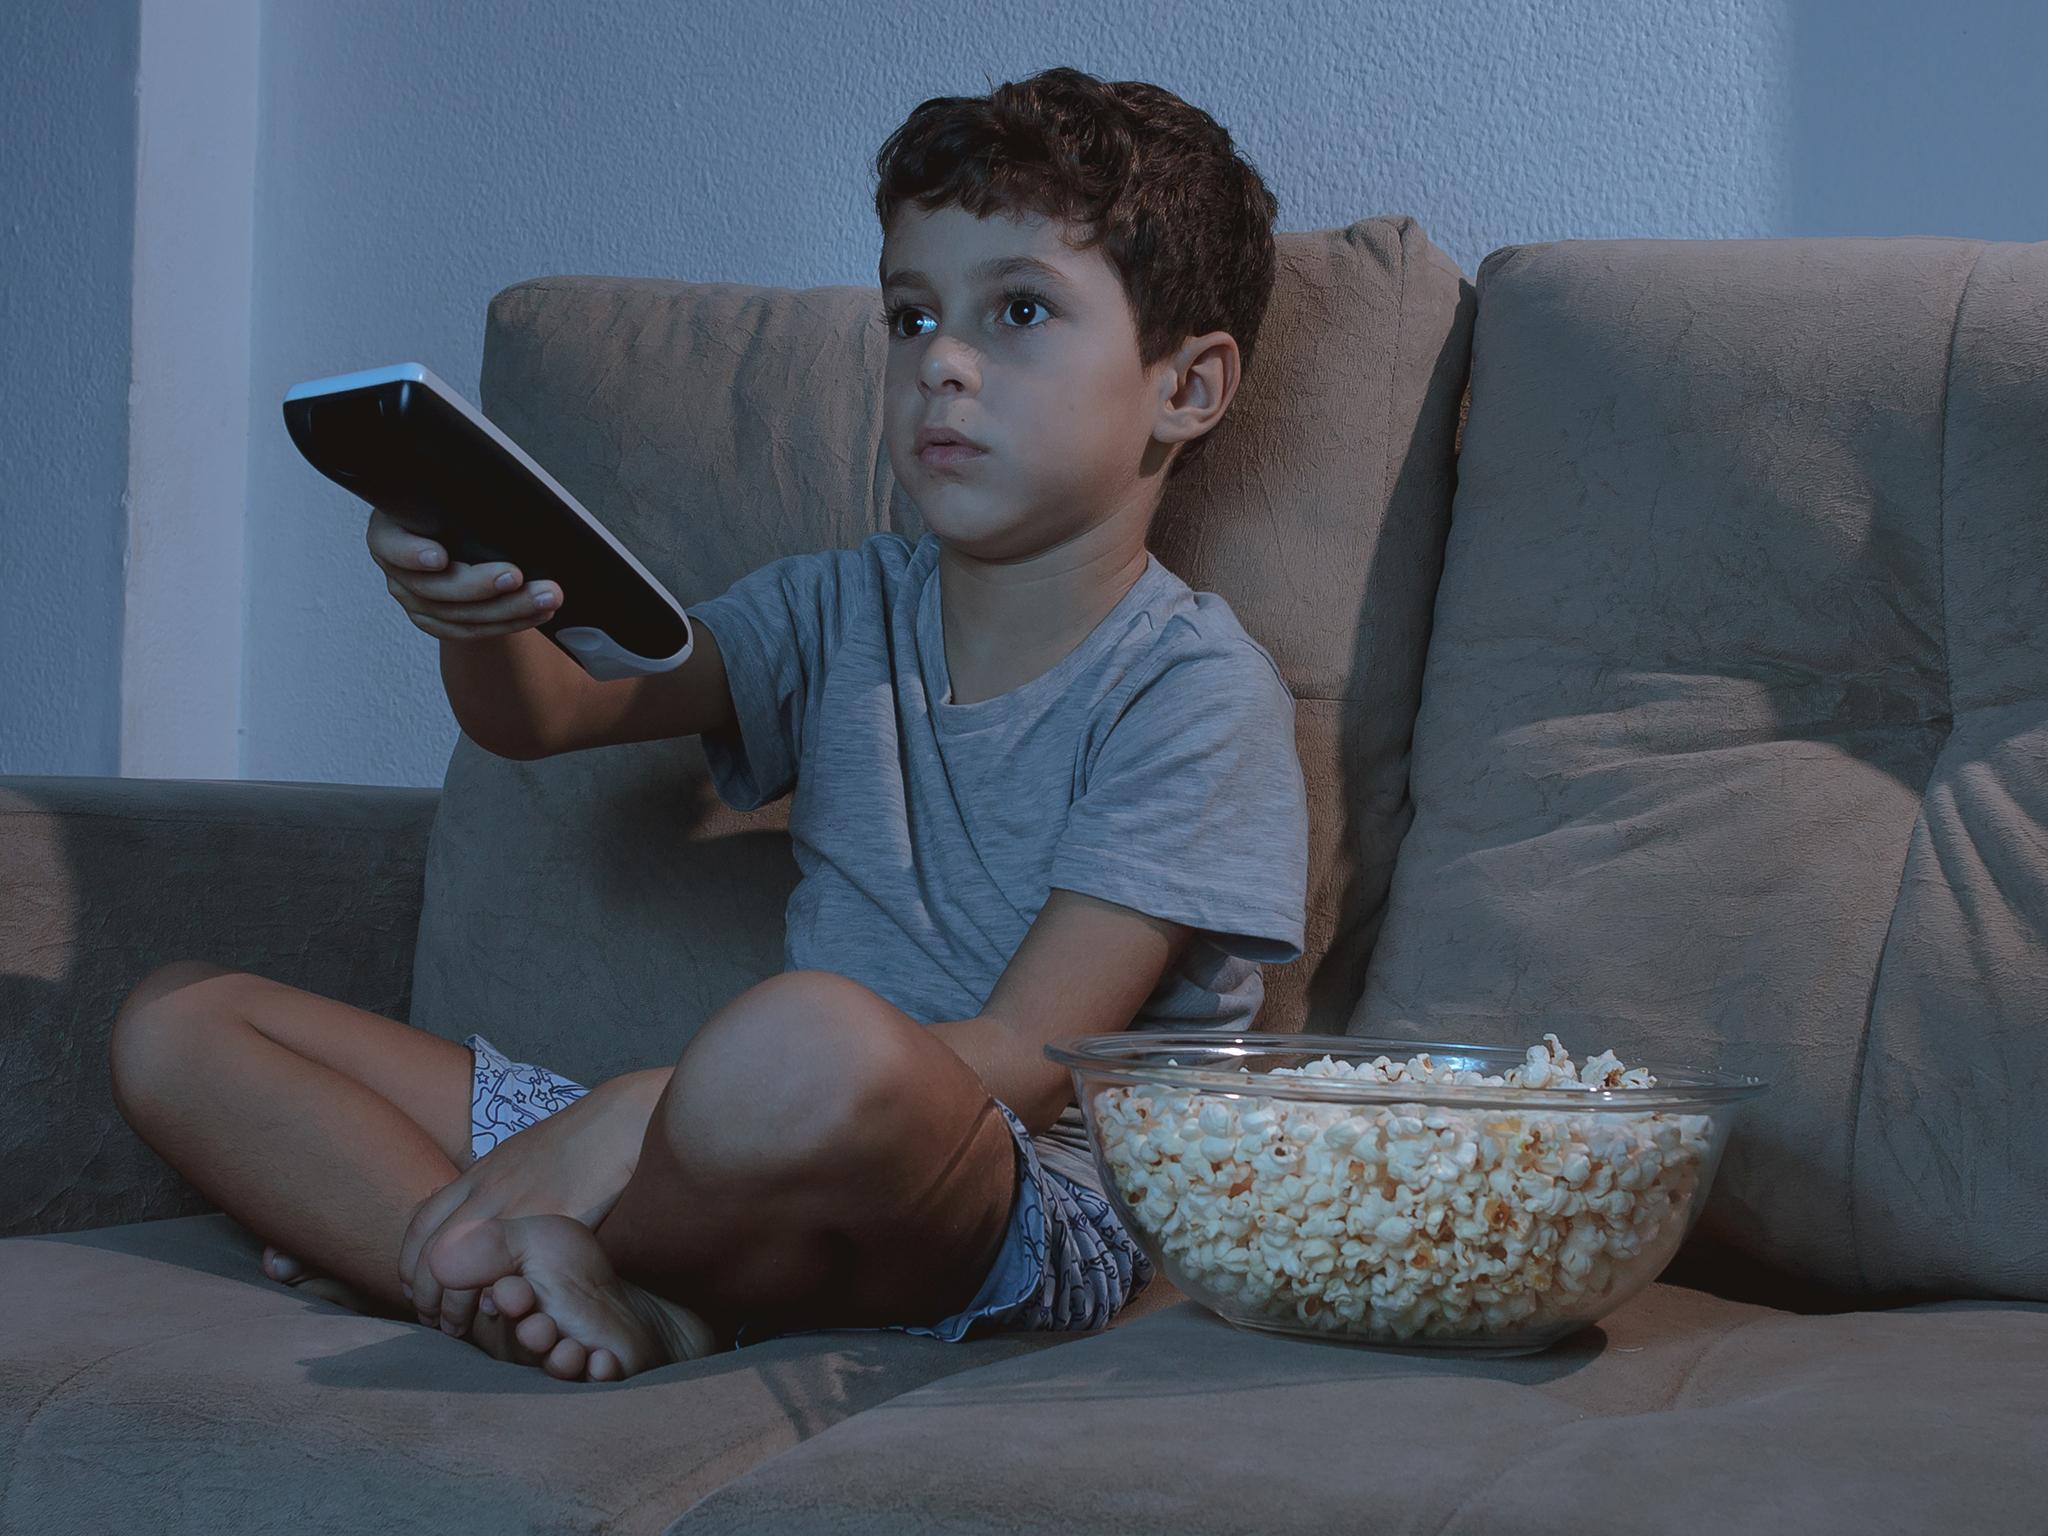 Twenty-four per cent of infants have asked to stay at home so they can watch their favourite TV show